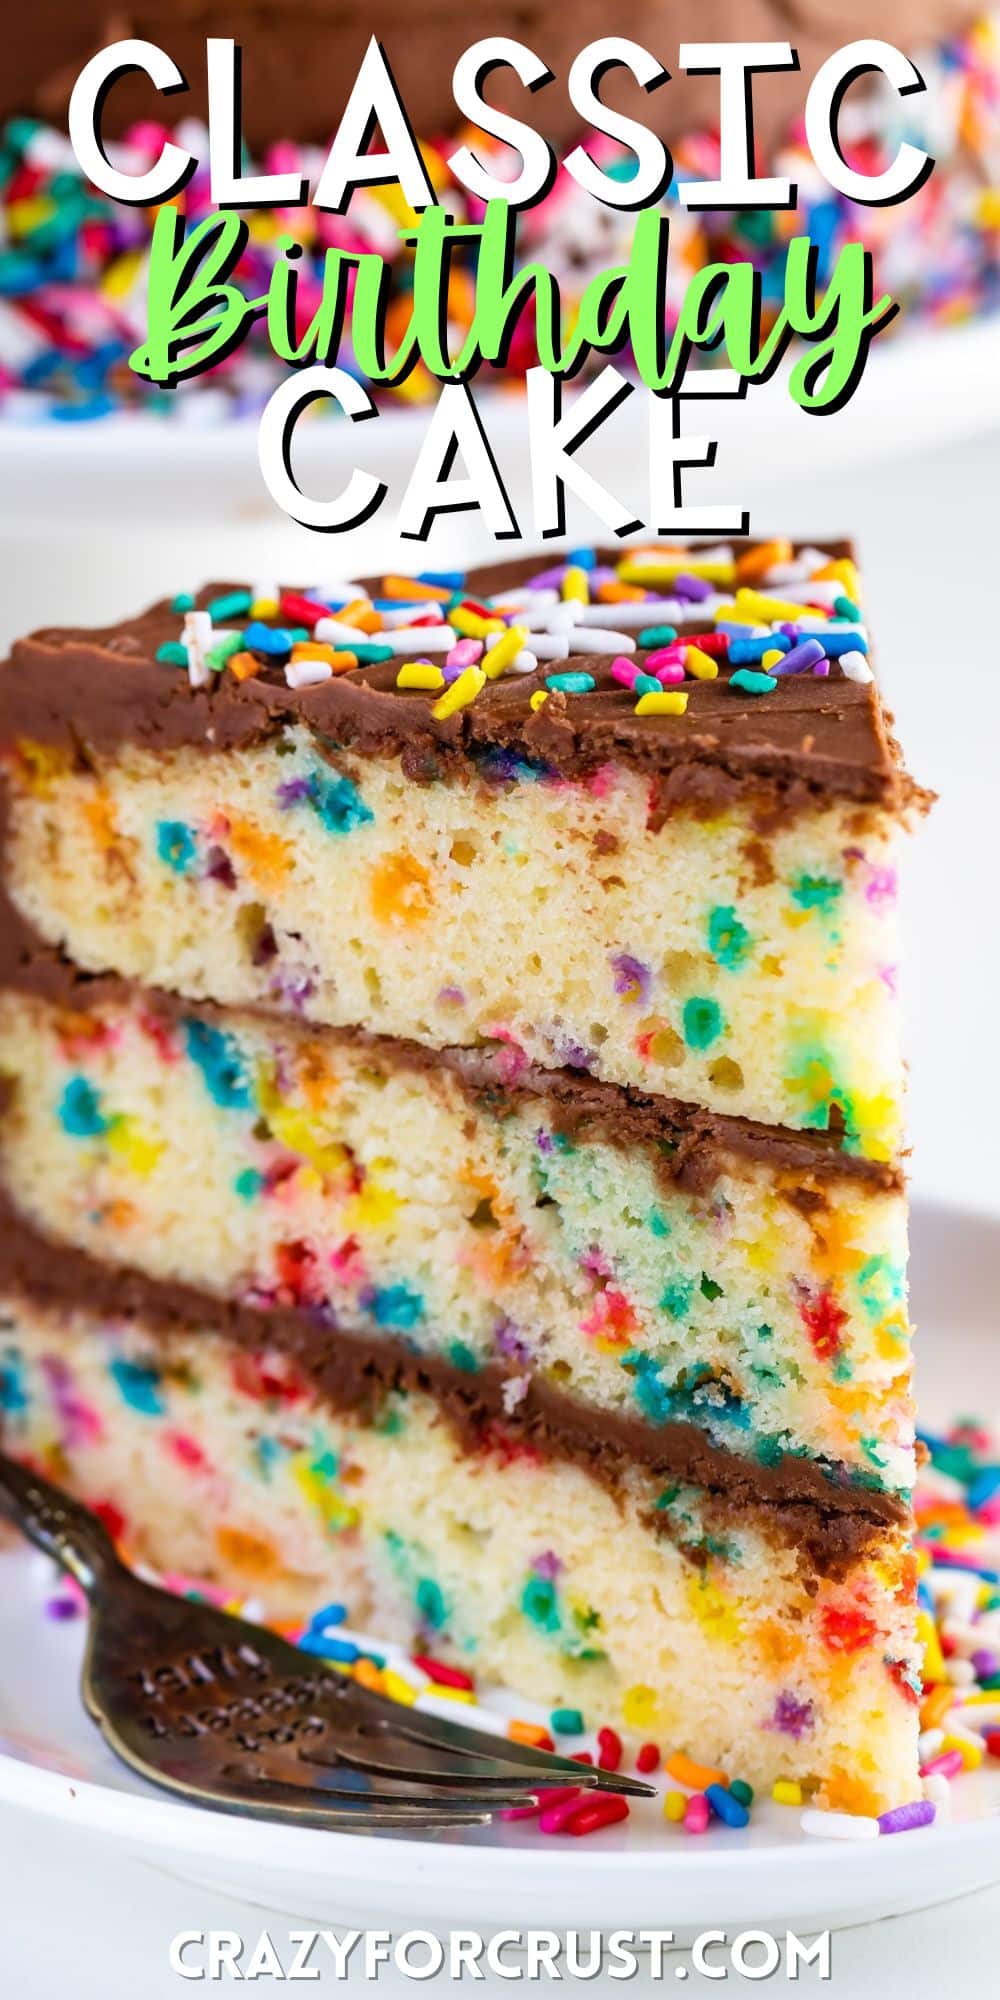 one slice of birthday cake with chocolate frosting and sprinkles on top with words on the image.